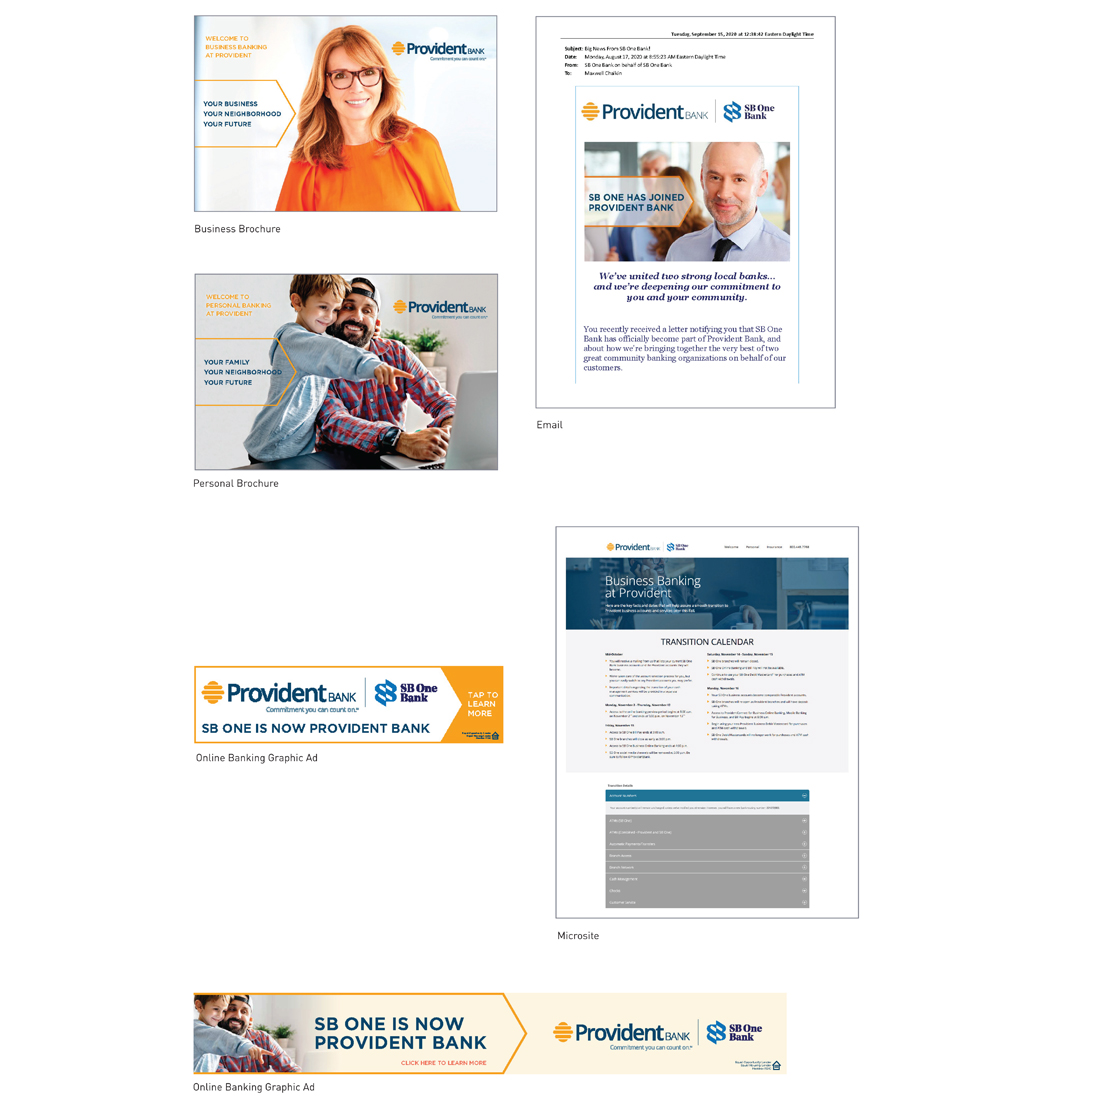 Provident Bank merger personal and business brochure covers, email, microsite, and digital ads